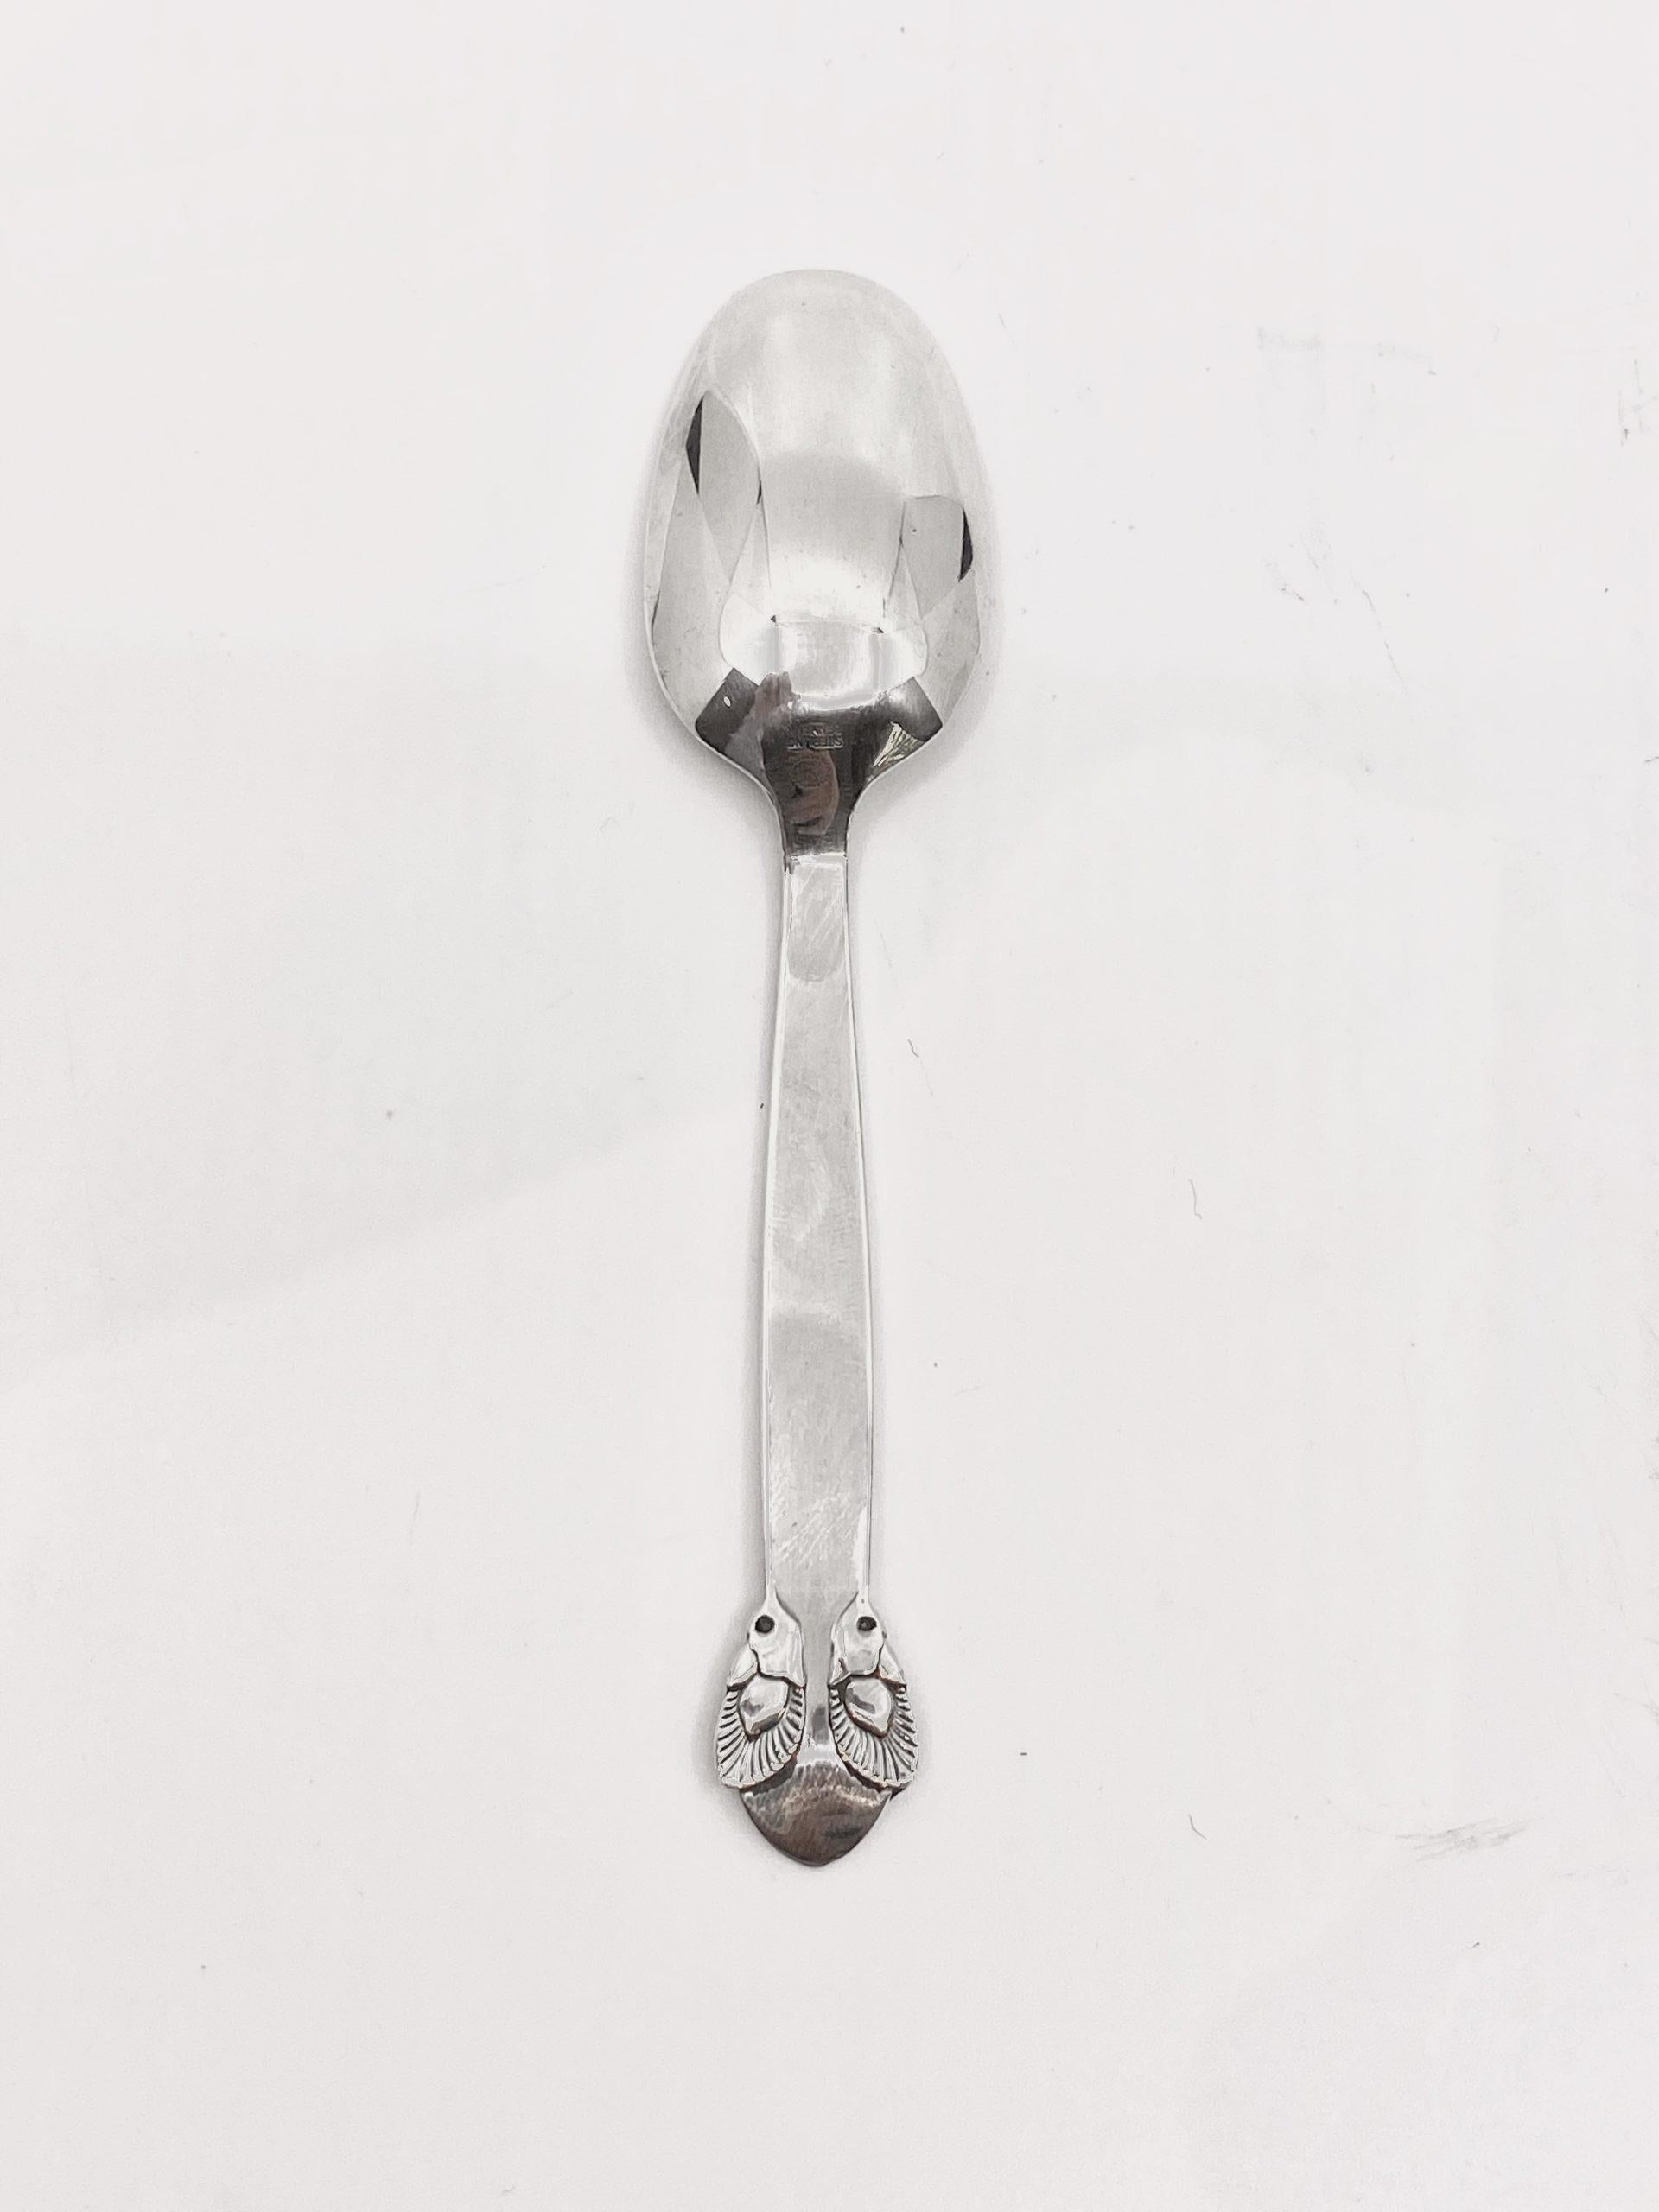 A Georg Jensen sterling silver medium teaspoon, item #032 in the rare Bittersweet pattern, design #79 from 1940 by Gundorph Albertus. This is the sister pattern to Cactus, also designed by Gundorph Albertus.

Additional information:
Material: